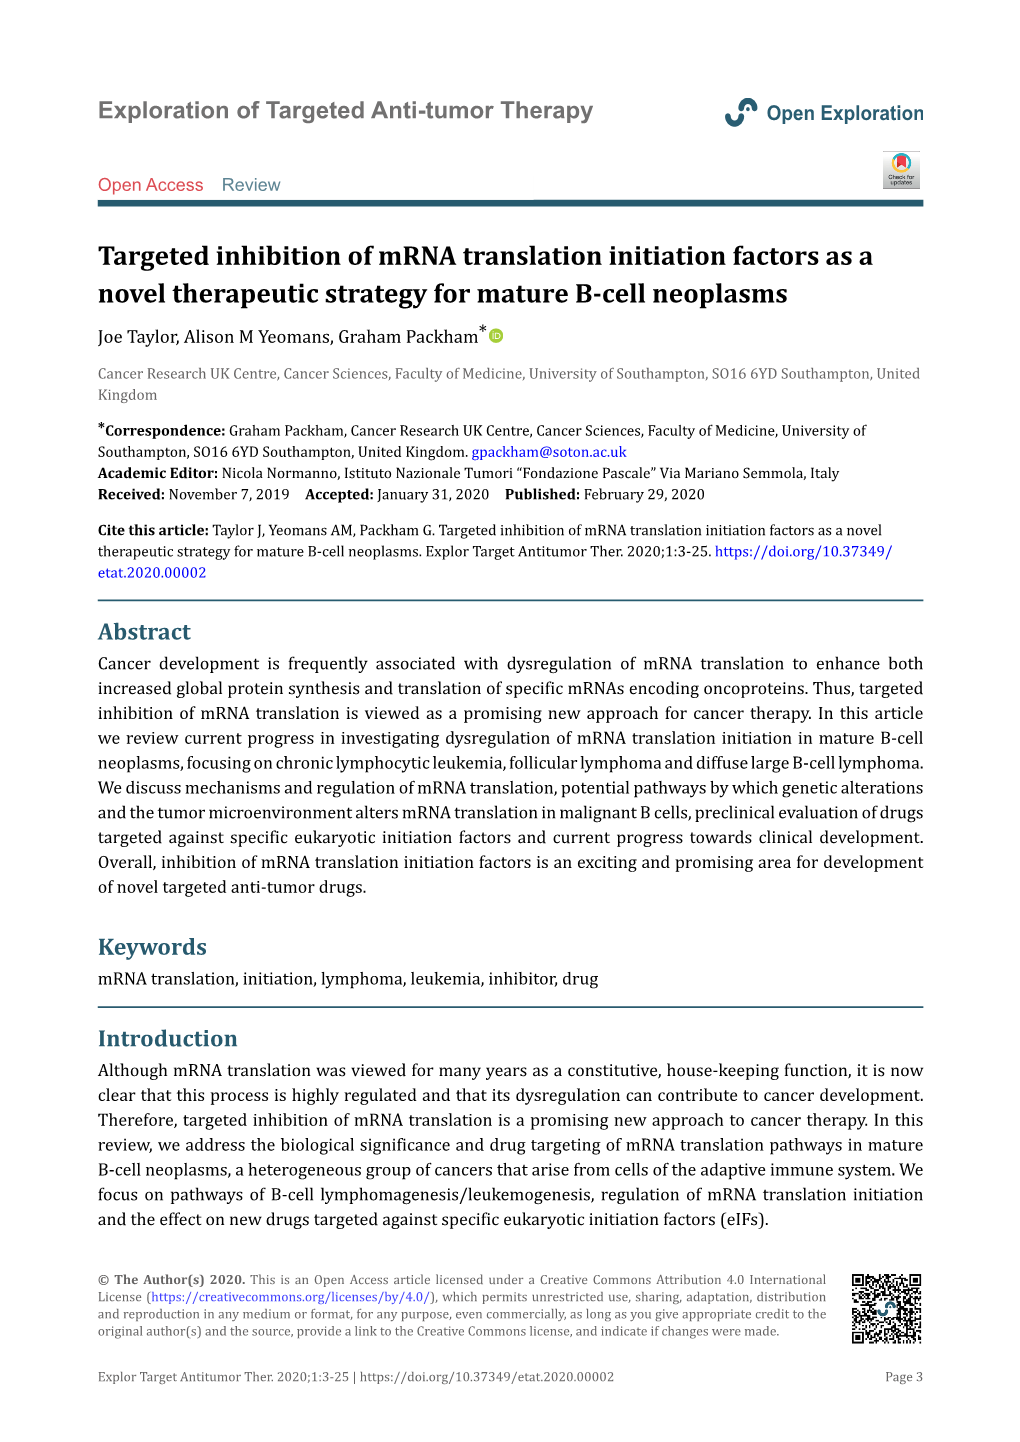 Targeted Inhibition of Mrna Translation Initiation Factors As a Novel Therapeutic Strategy for Mature B-Cell Neoplasms Joe Taylor, Alison M Yeomans, Graham Packham*